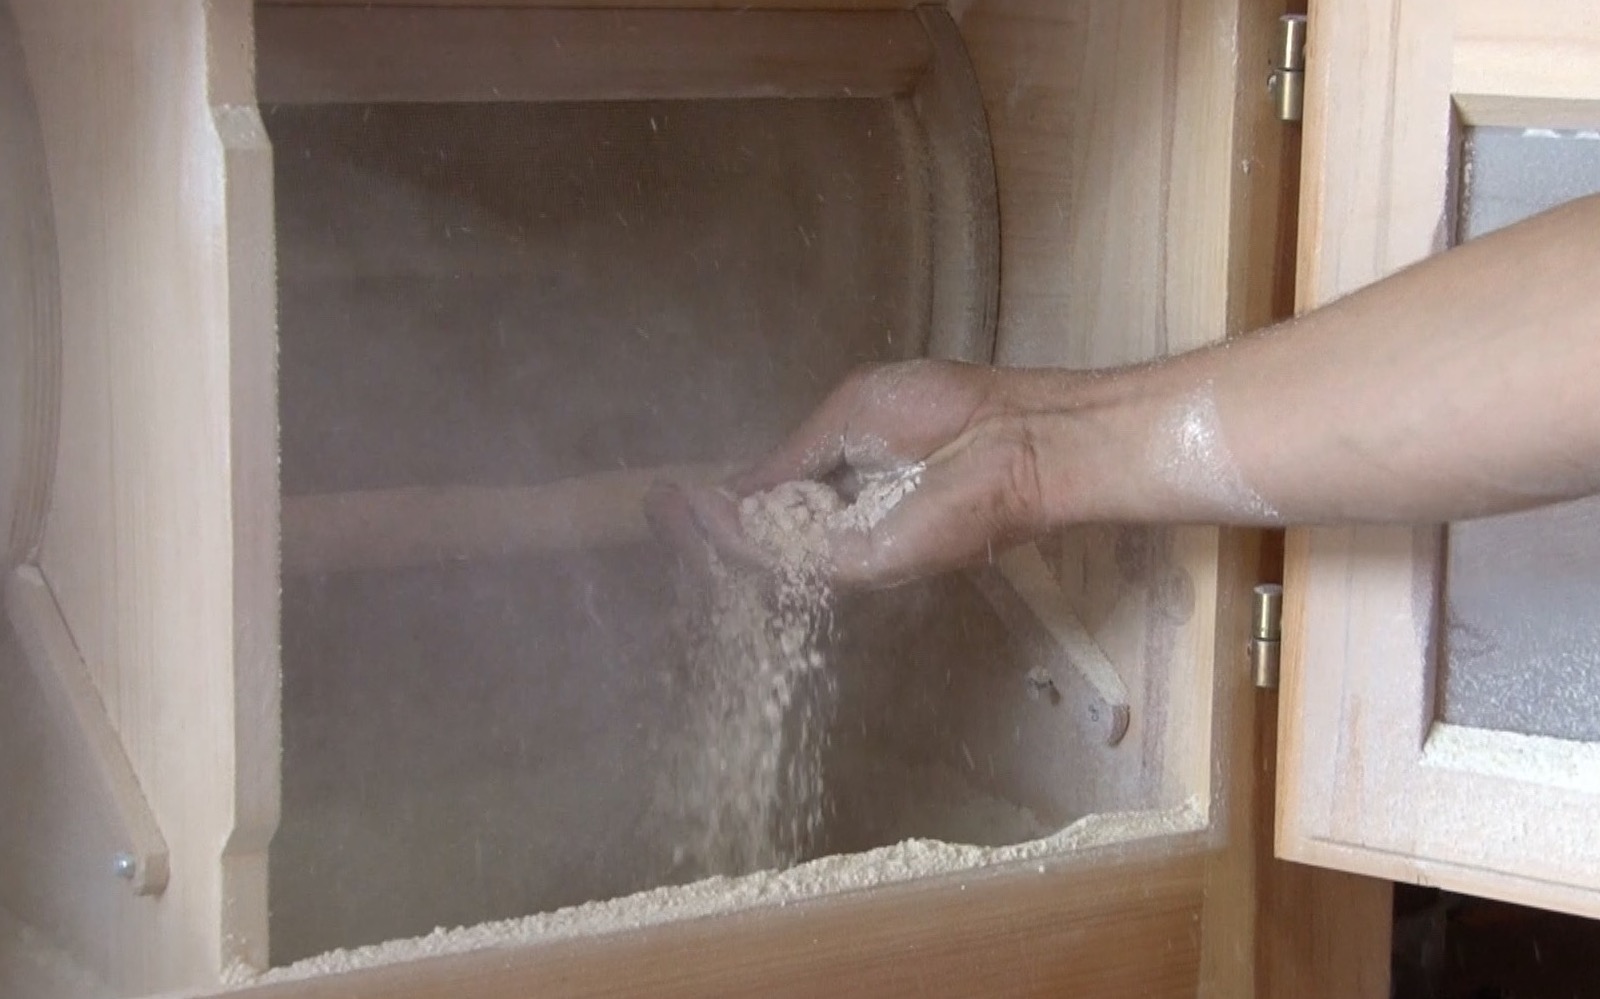 Check out the flour making process at Shagbark Seed & Mill!